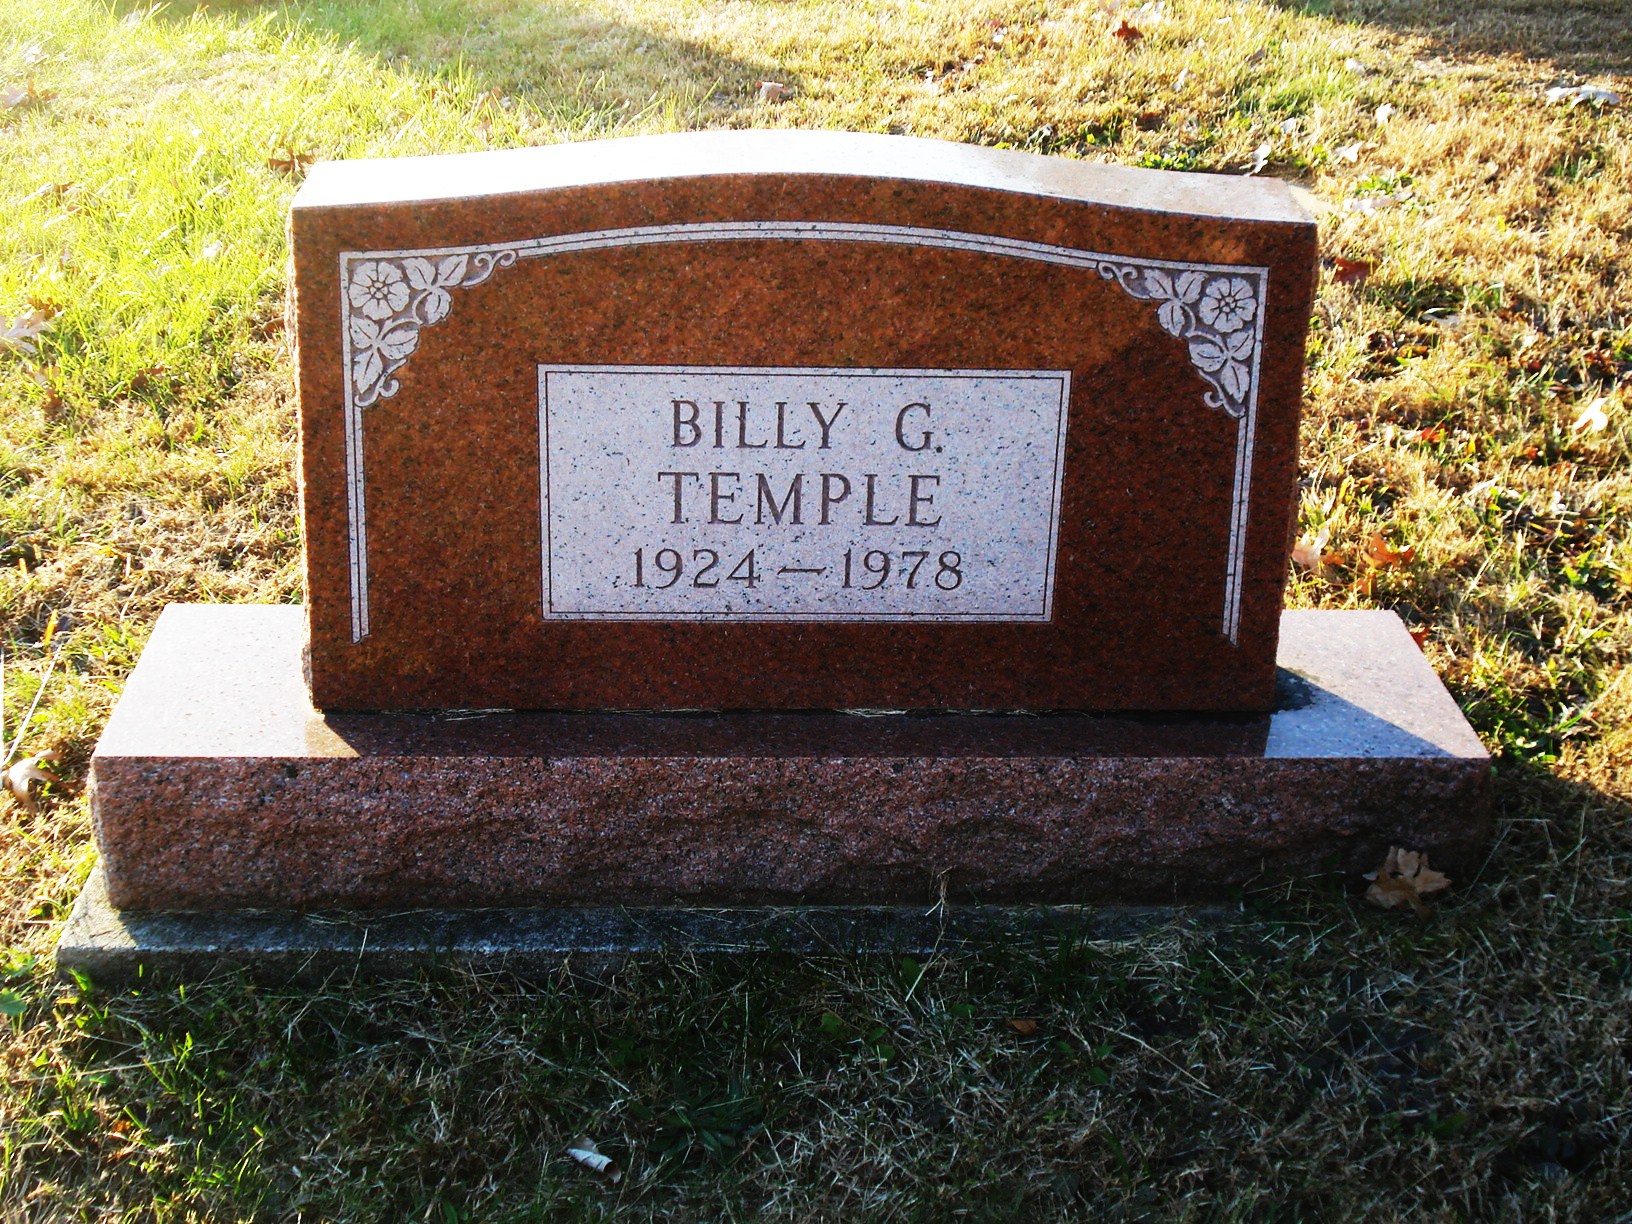 Dr Billy Gene Temple (1924-1978)